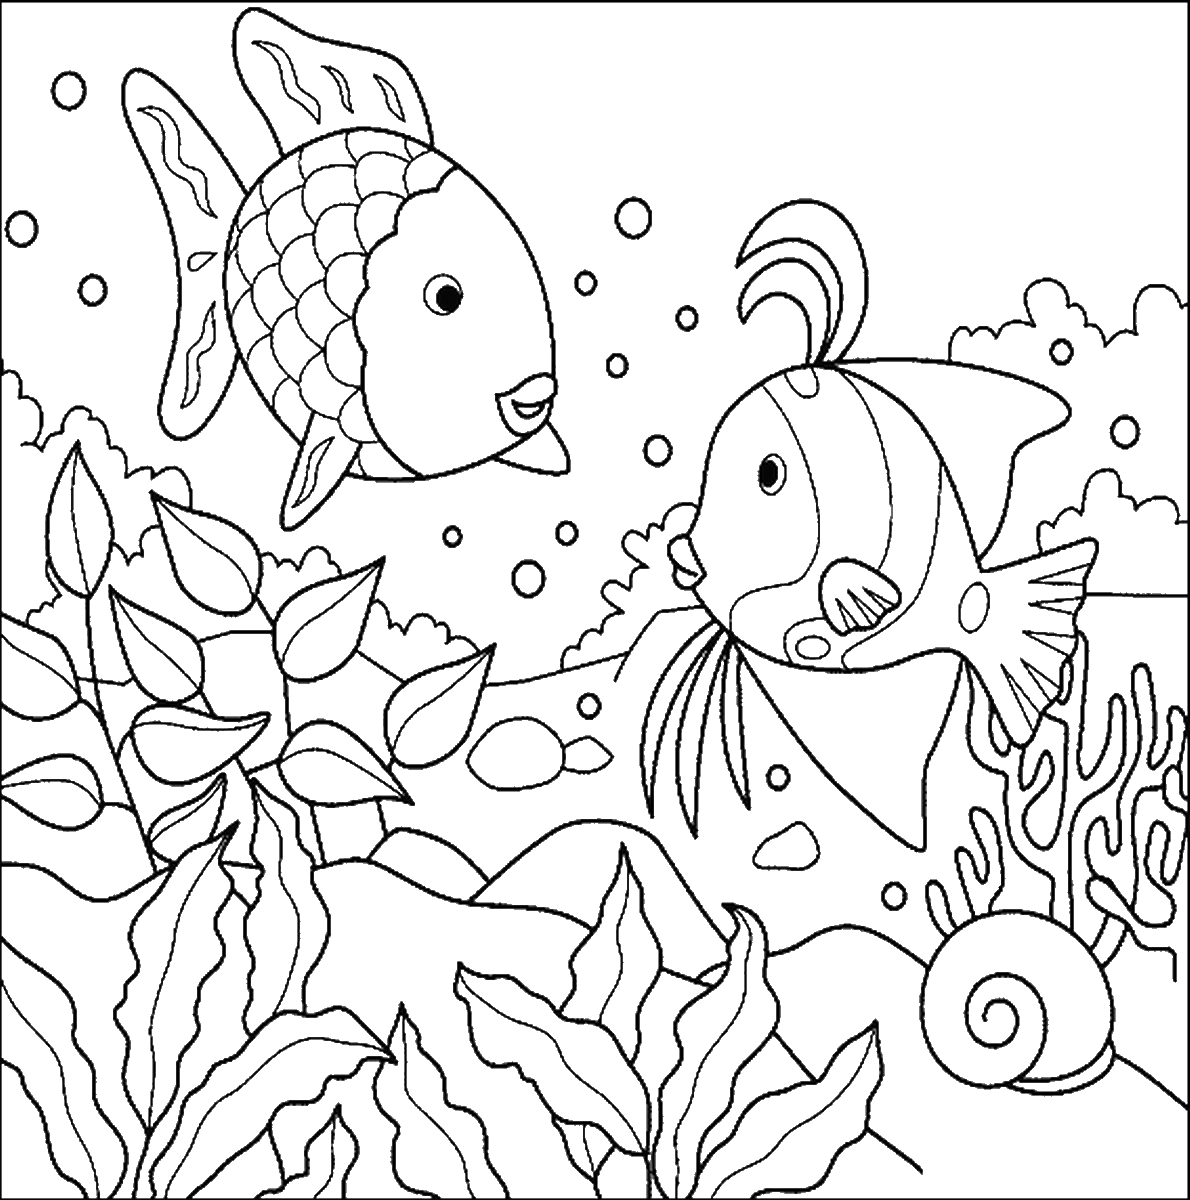 fish-coloring-pages